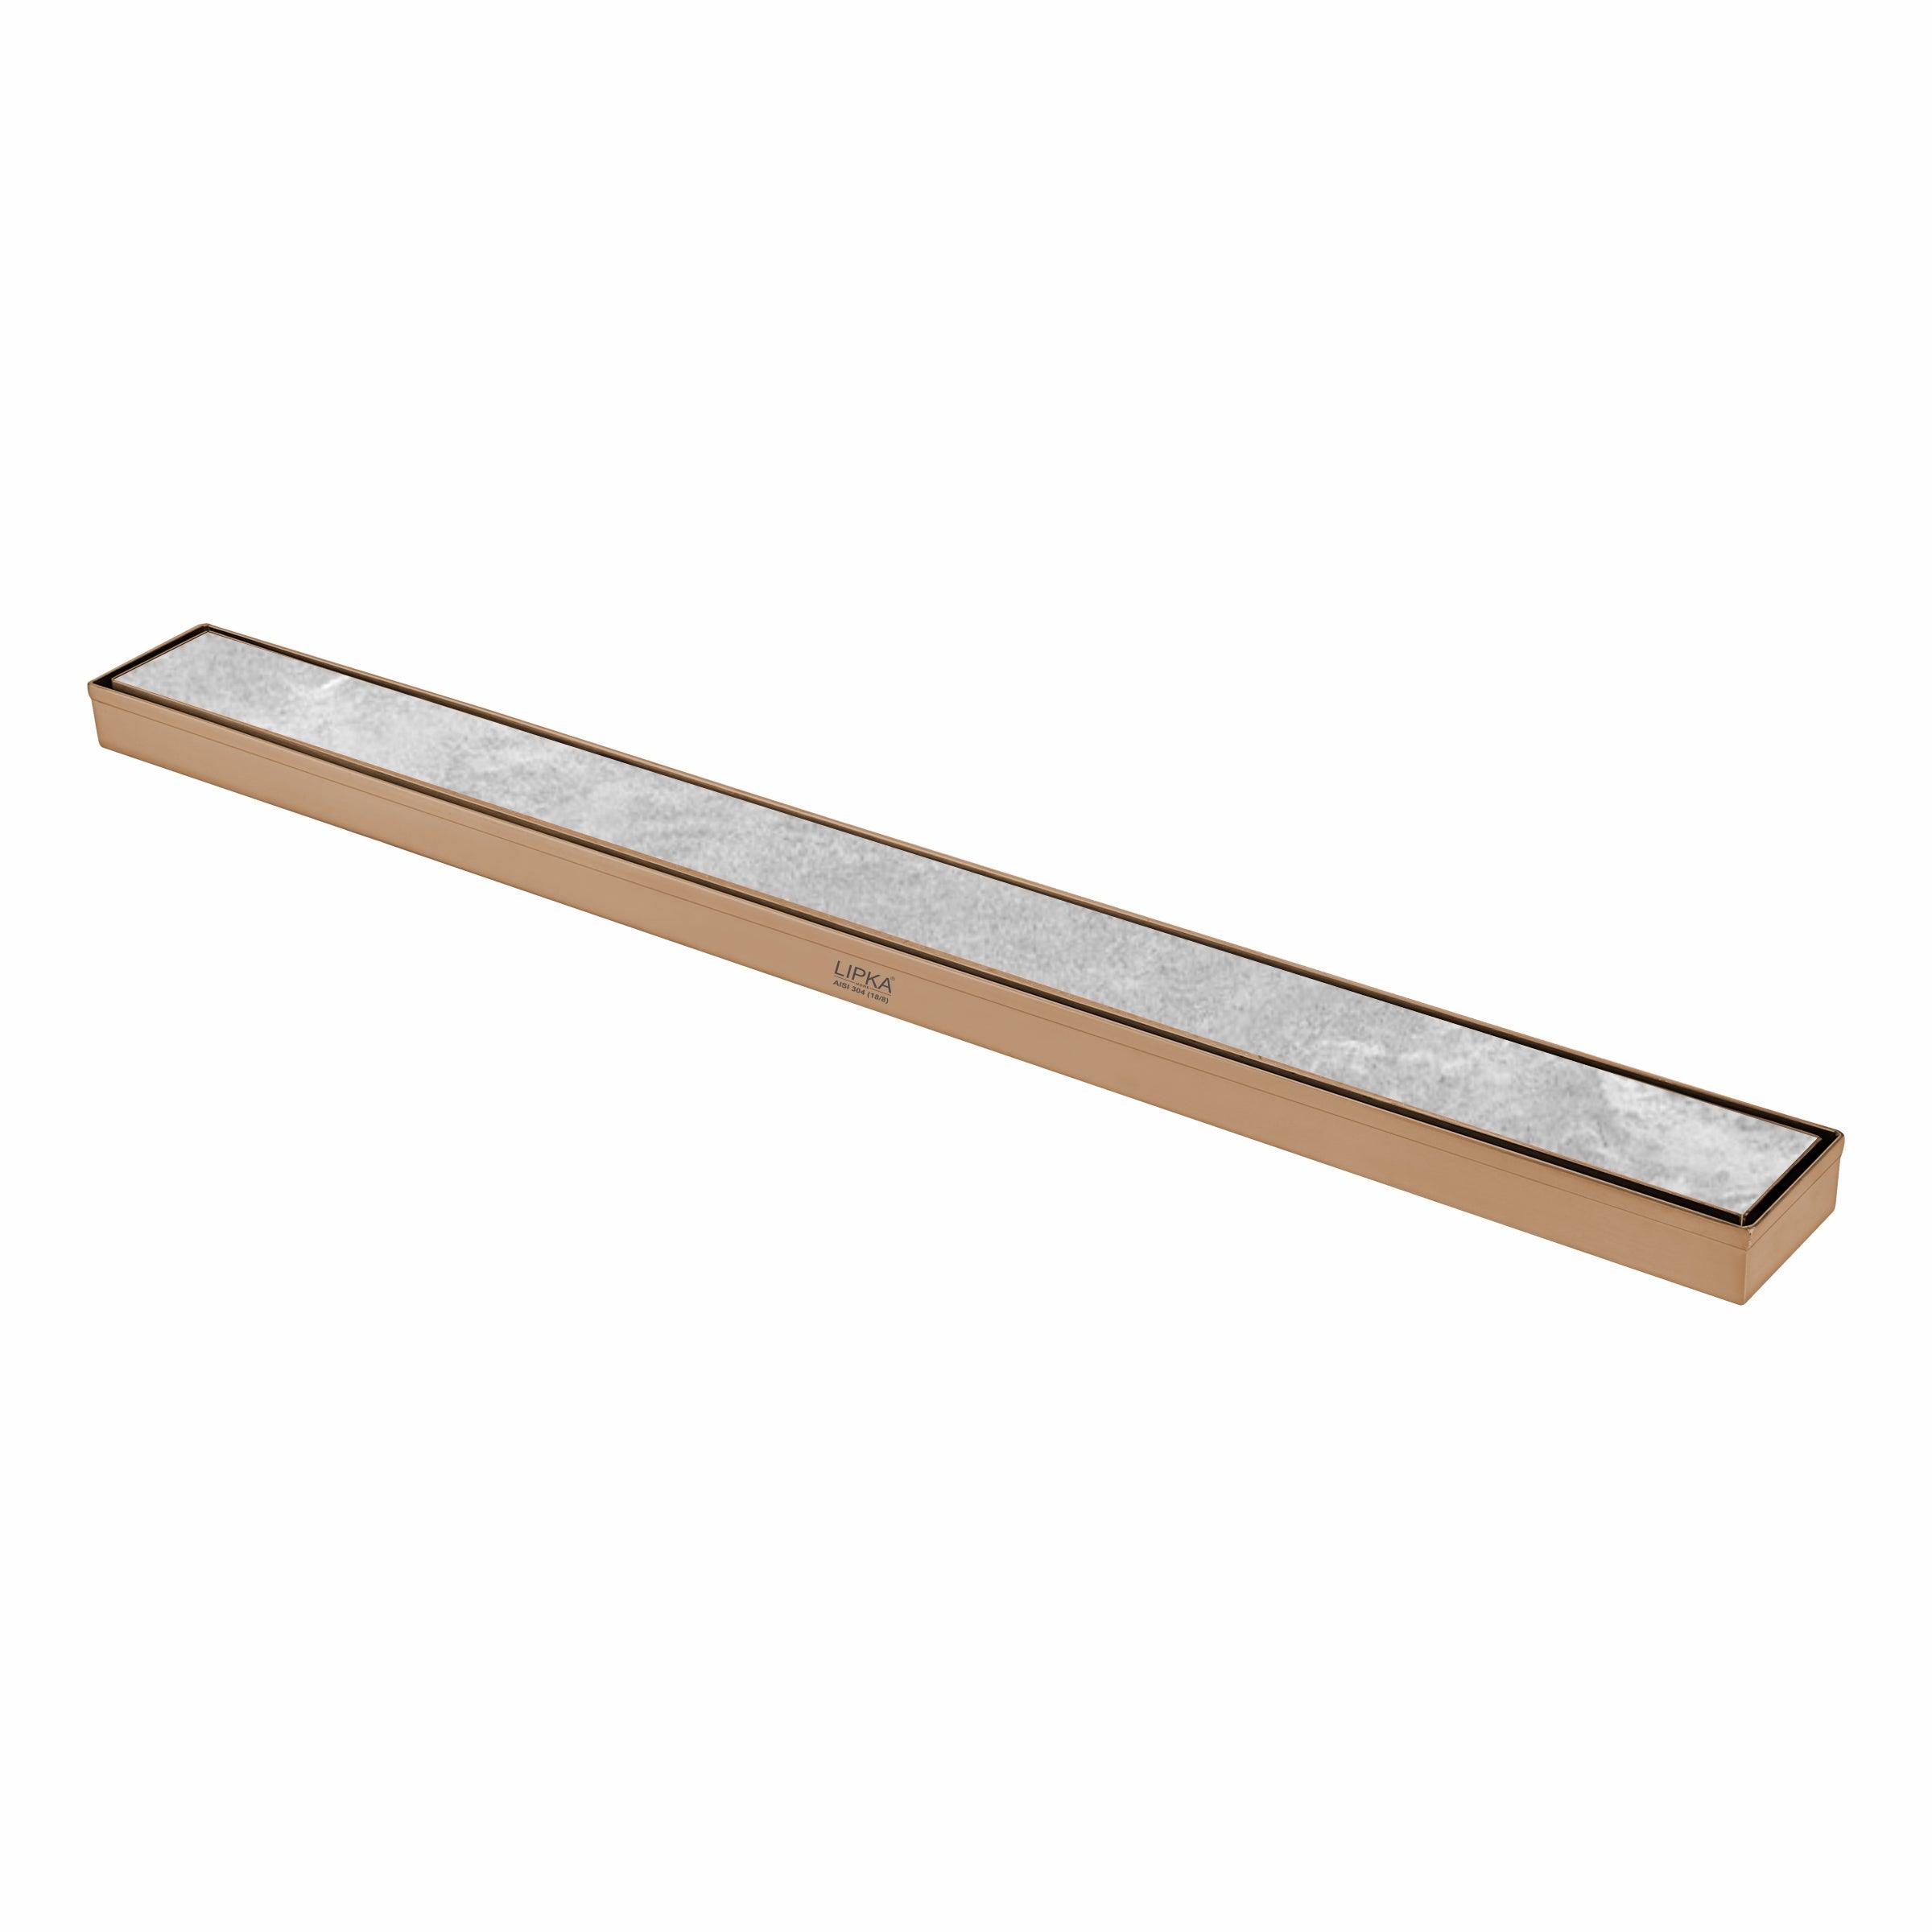 Marble Insert Shower Drain Channel - Antique Copper (36 x 2 Inches) 